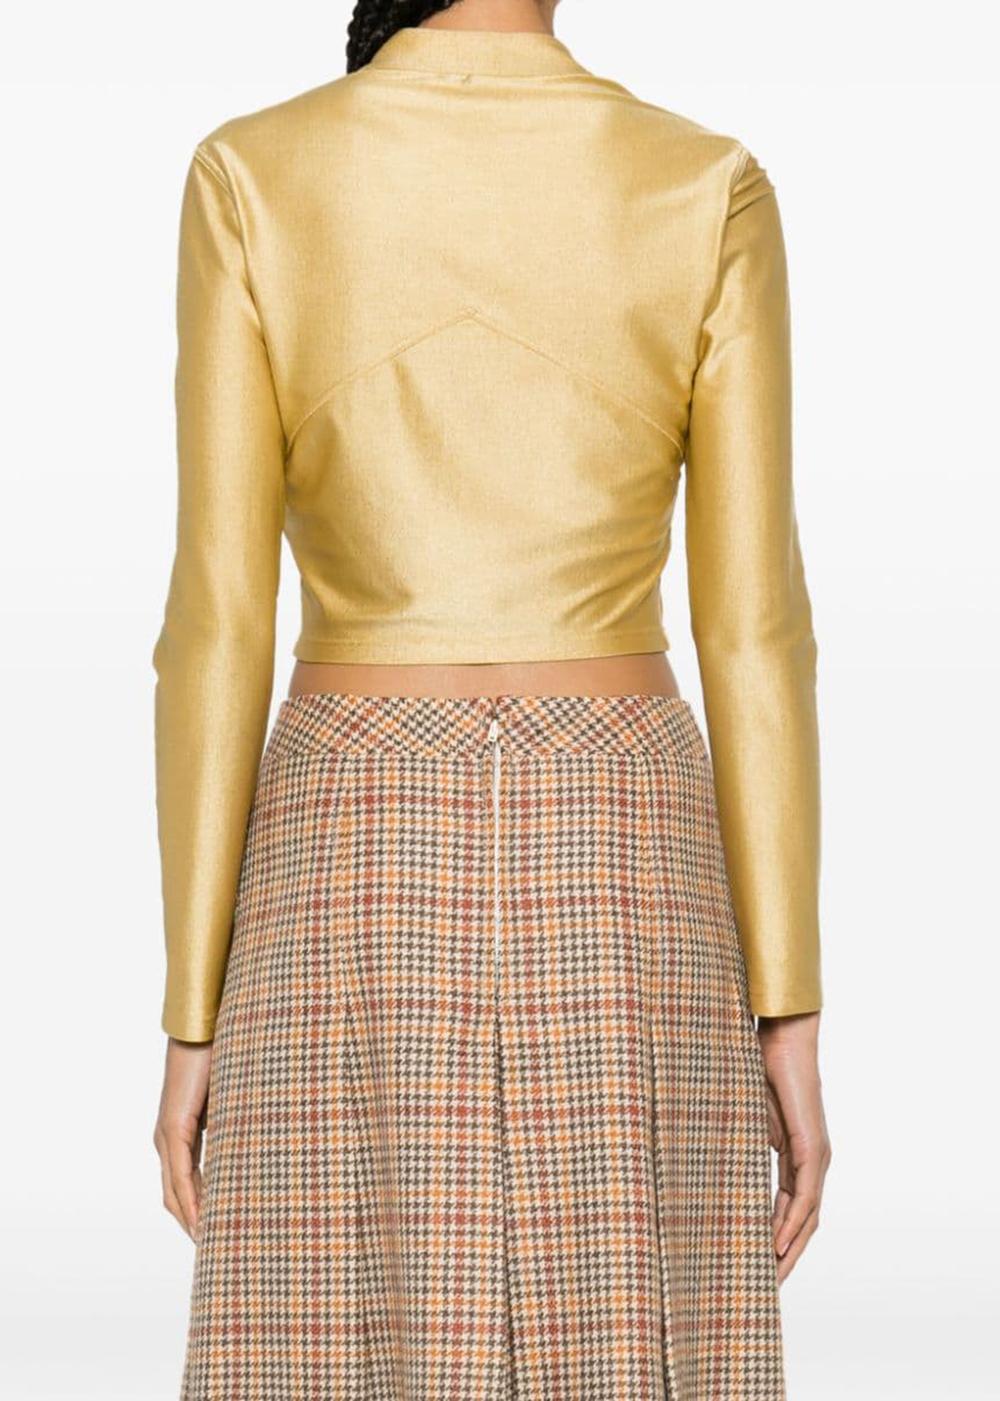  Chanel Gold-Tone Metallic Cropped Jacket For Sale 1